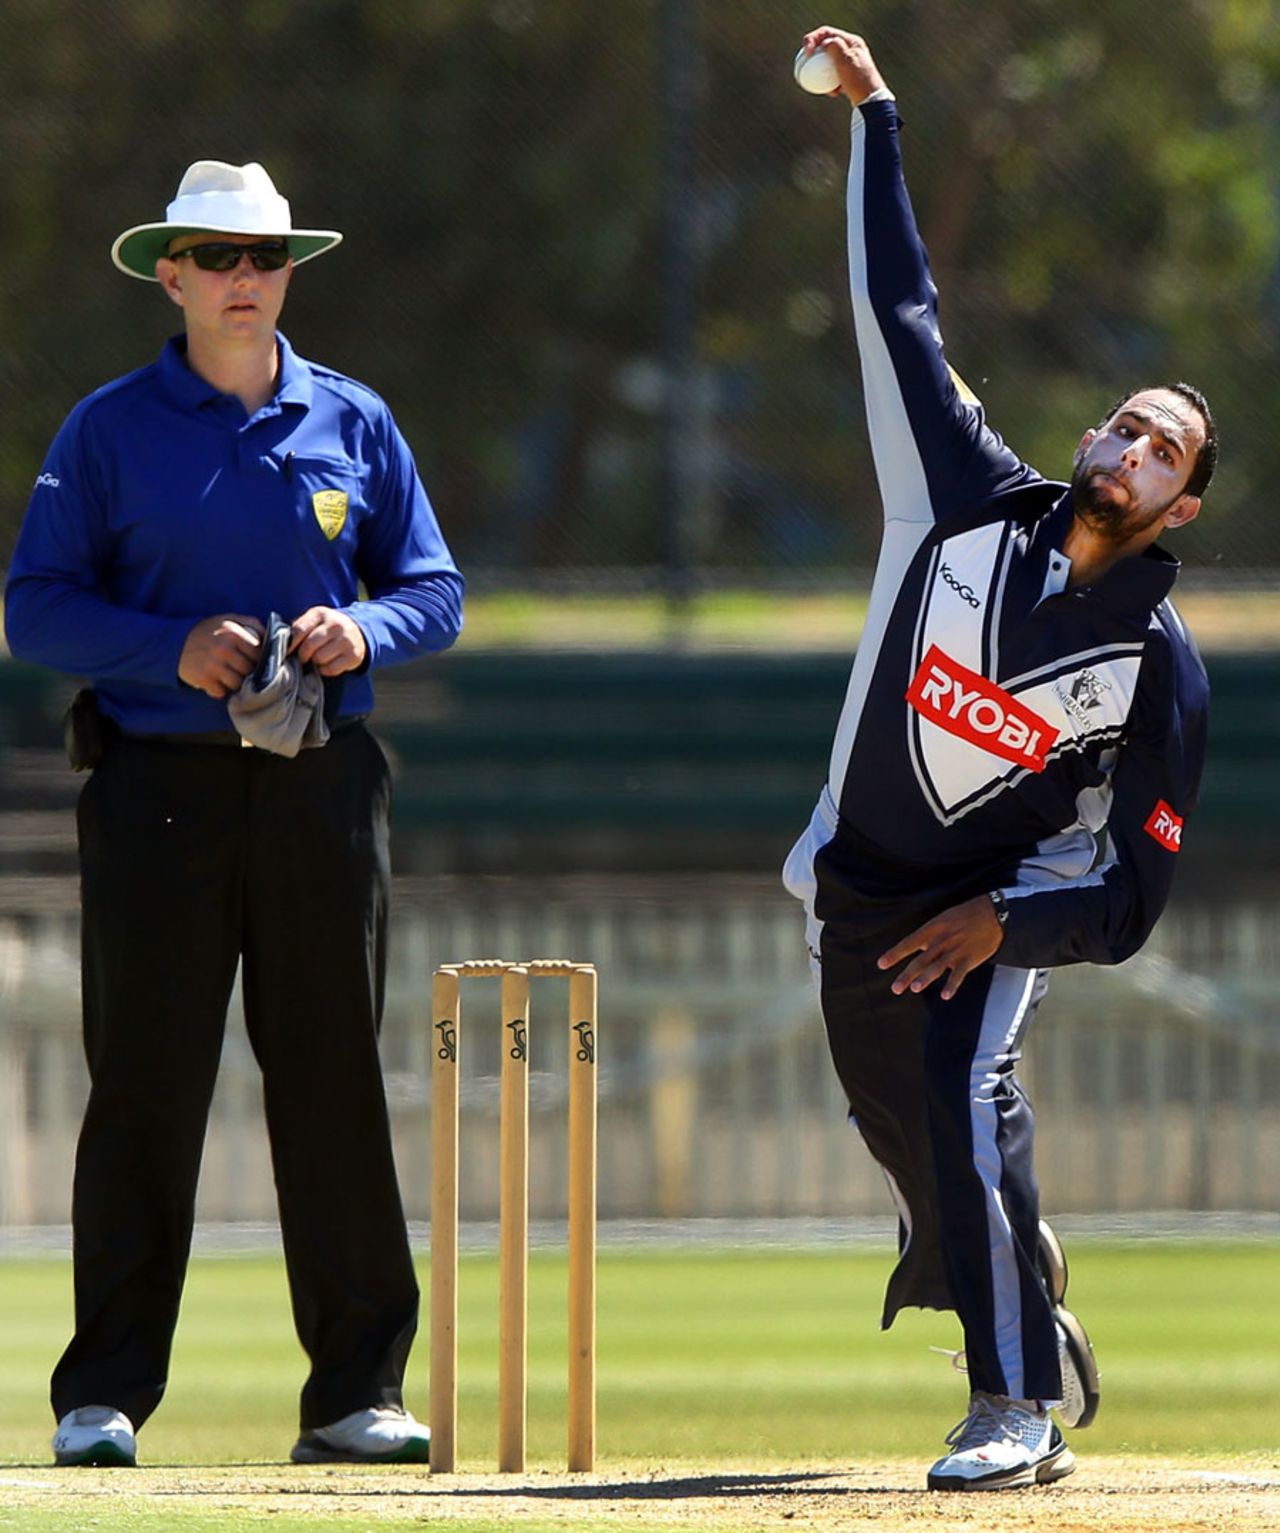 Victoria legspinner Fawad Ahmed took 2 for 30, Victoria v England Lions, tour match, Junction Oval, Melbourne, February 7, 2013